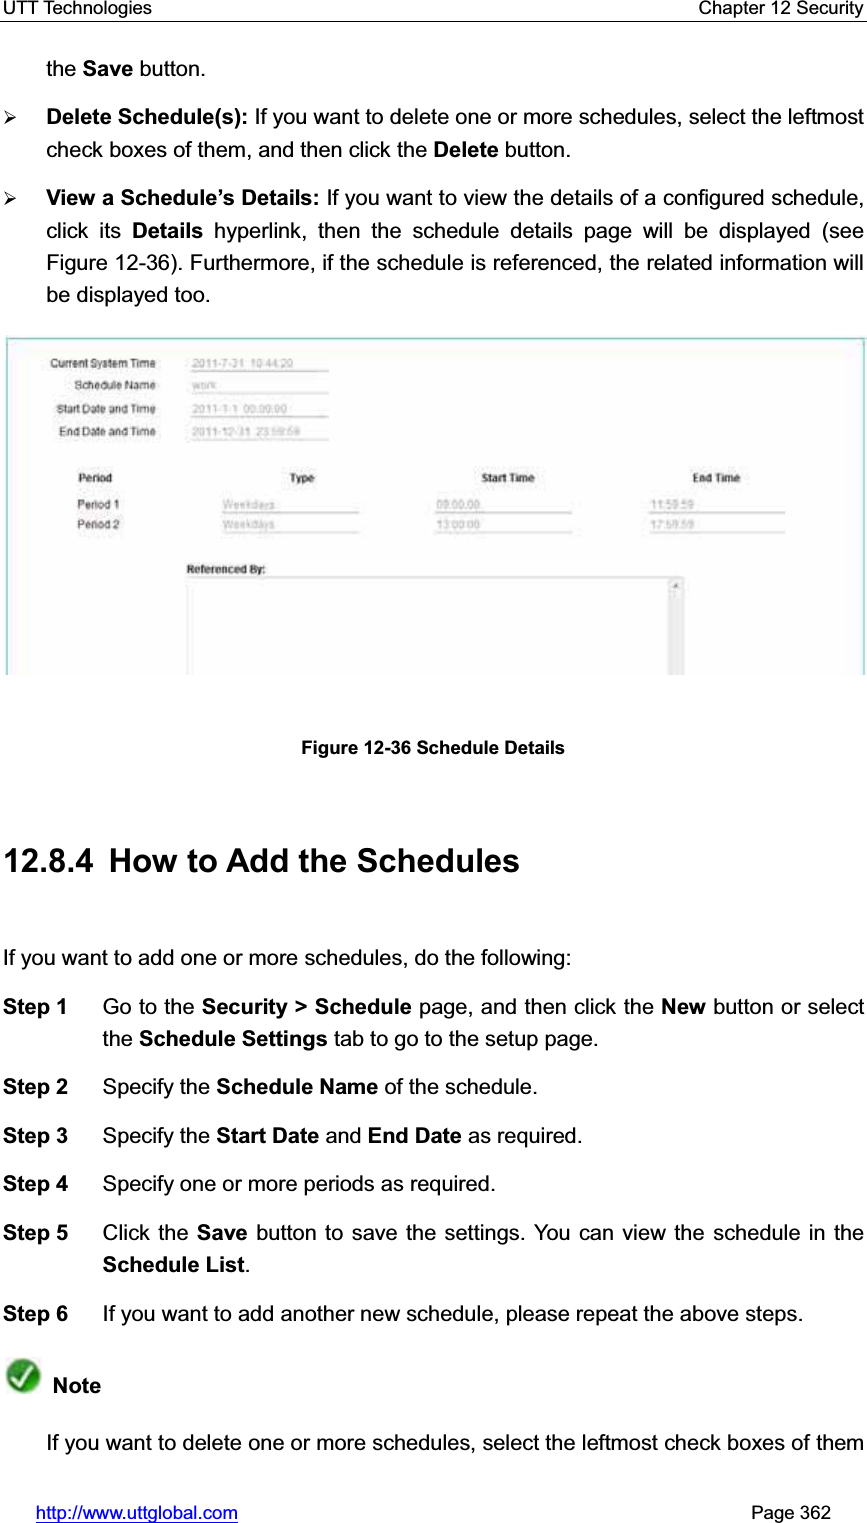 UTT Technologies    Chapter 12 Security   http://www.uttglobal.com                                                       Page 362 the Save button. ¾Delete Schedule(s): If you want to delete one or more schedules, select the leftmost check boxes of them, and then click the Delete button. ¾View a Schedule¶s Details: If you want to view the details of a configured schedule, click its Details hyperlink, then the schedule details page will be displayed (see Figure 12-36). Furthermore, if the schedule is referenced, the related information will be displayed too. Figure 12-36 Schedule Details 12.8.4  How to Add the Schedules If you want to add one or more schedules, do the following:   Step 1  Go to the Security &gt; Schedule page, and then click the New button or select the Schedule Settings tab to go to the setup page. Step 2  Specify the Schedule Name of the schedule. Step 3  Specify the Start Date and End Date as required. Step 4  Specify one or more periods as required. Step 5  Click the Save button to save the settings. You can view the schedule in theSchedule List.Step 6  If you want to add another new schedule, please repeat the above steps. NoteIf you want to delete one or more schedules, select the leftmost check boxes of them 